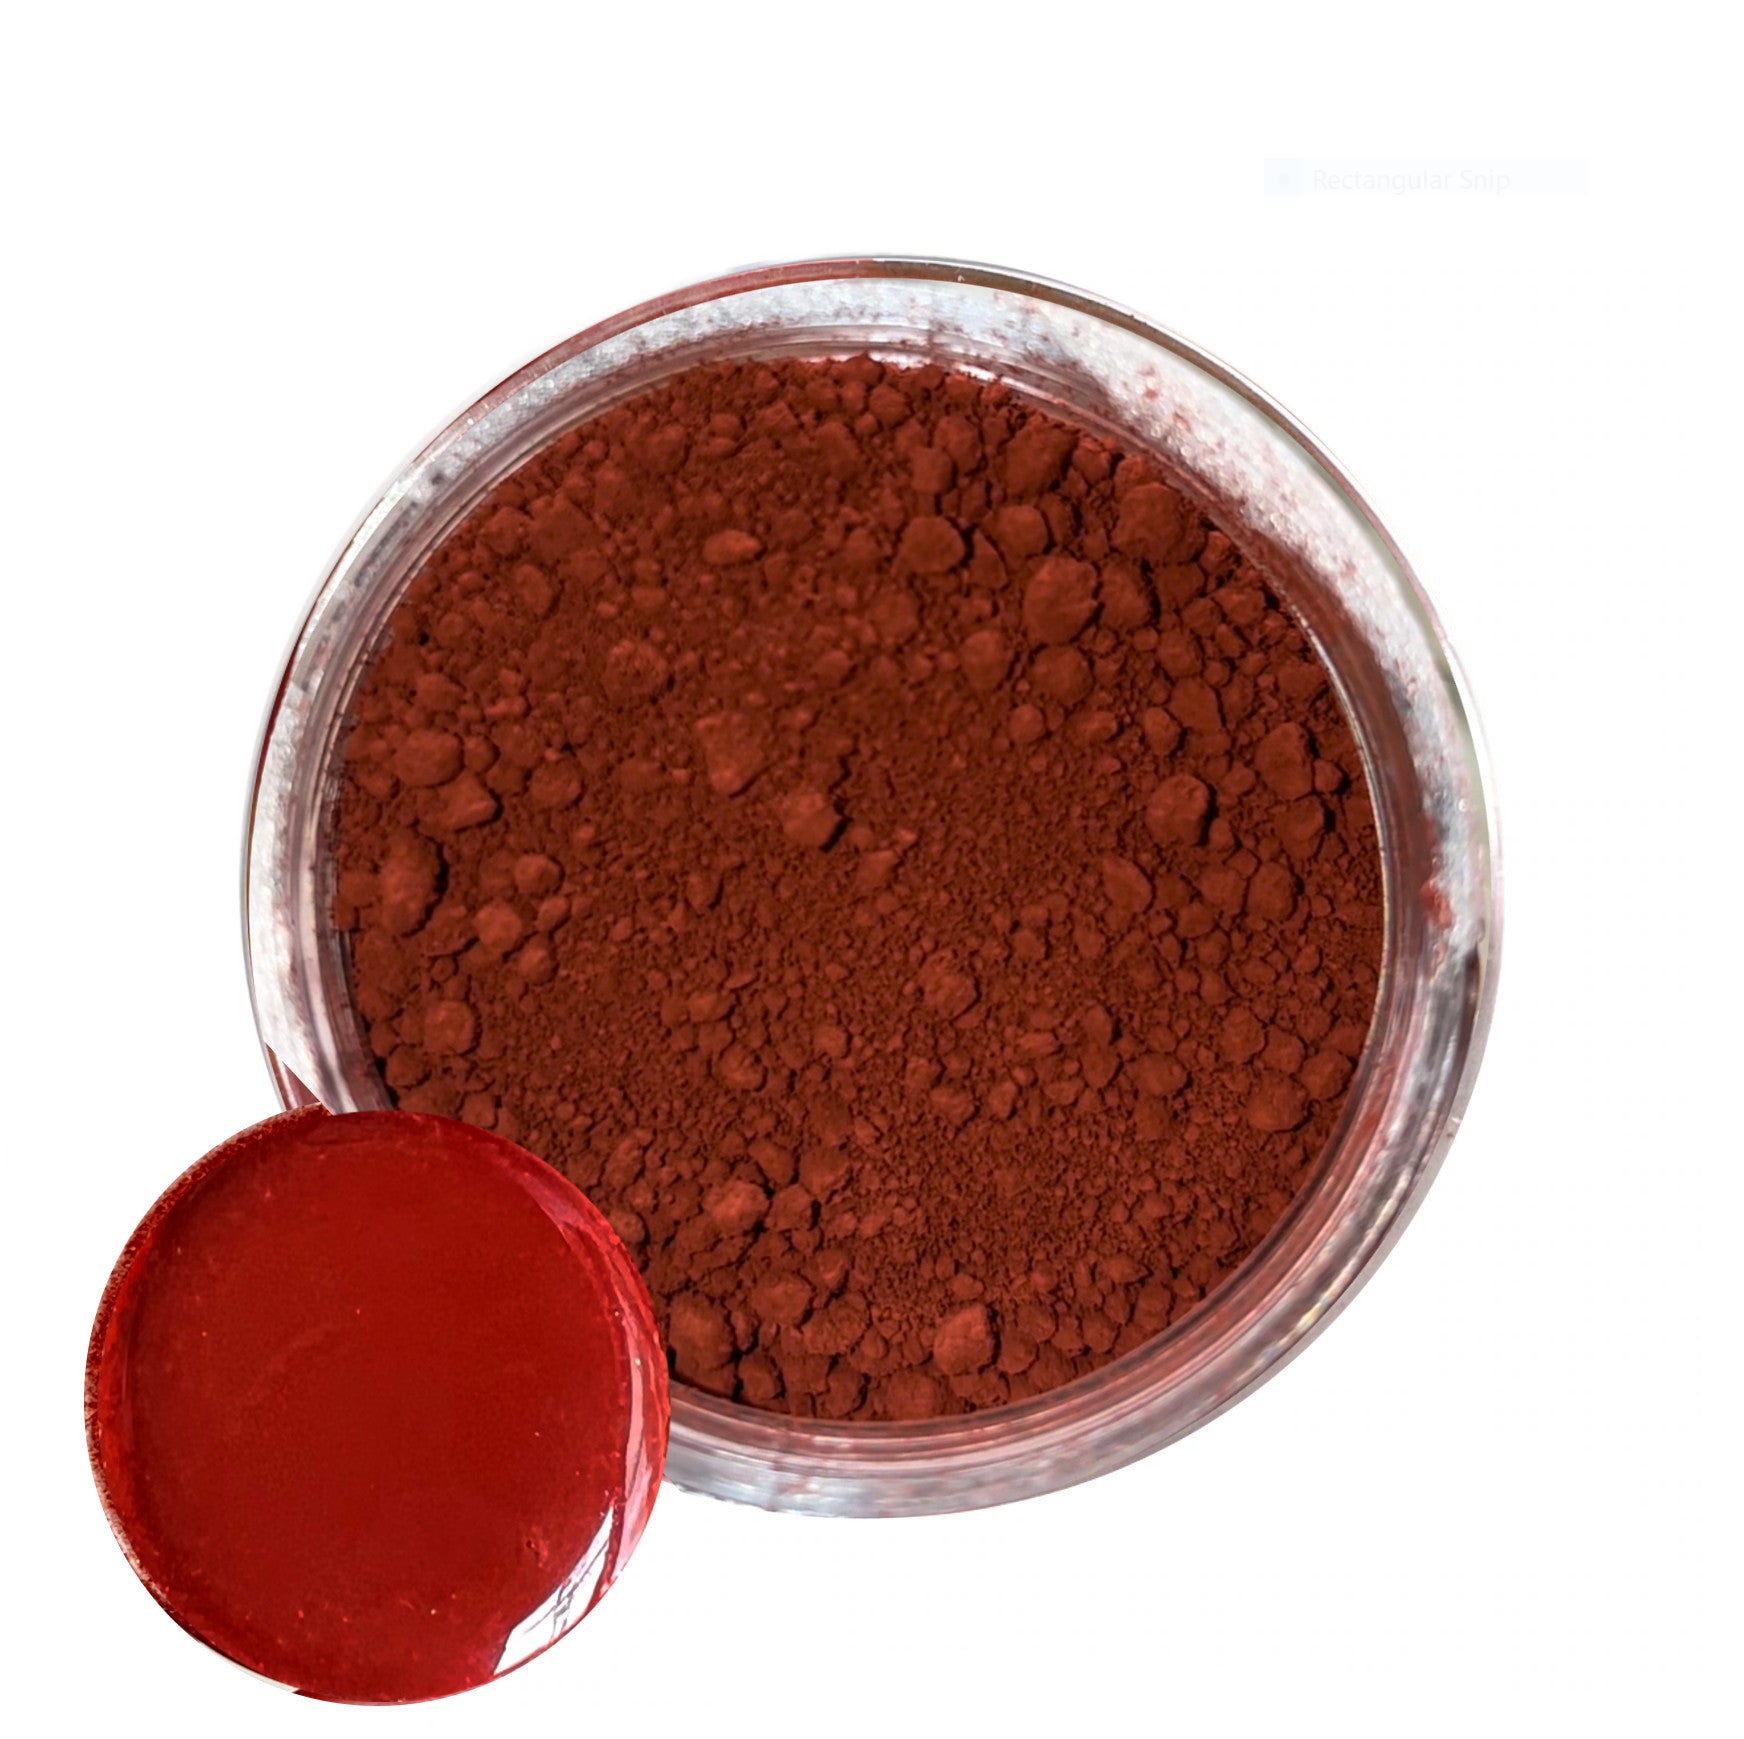 ARTISTRY PURE PIGMENT POWDERS